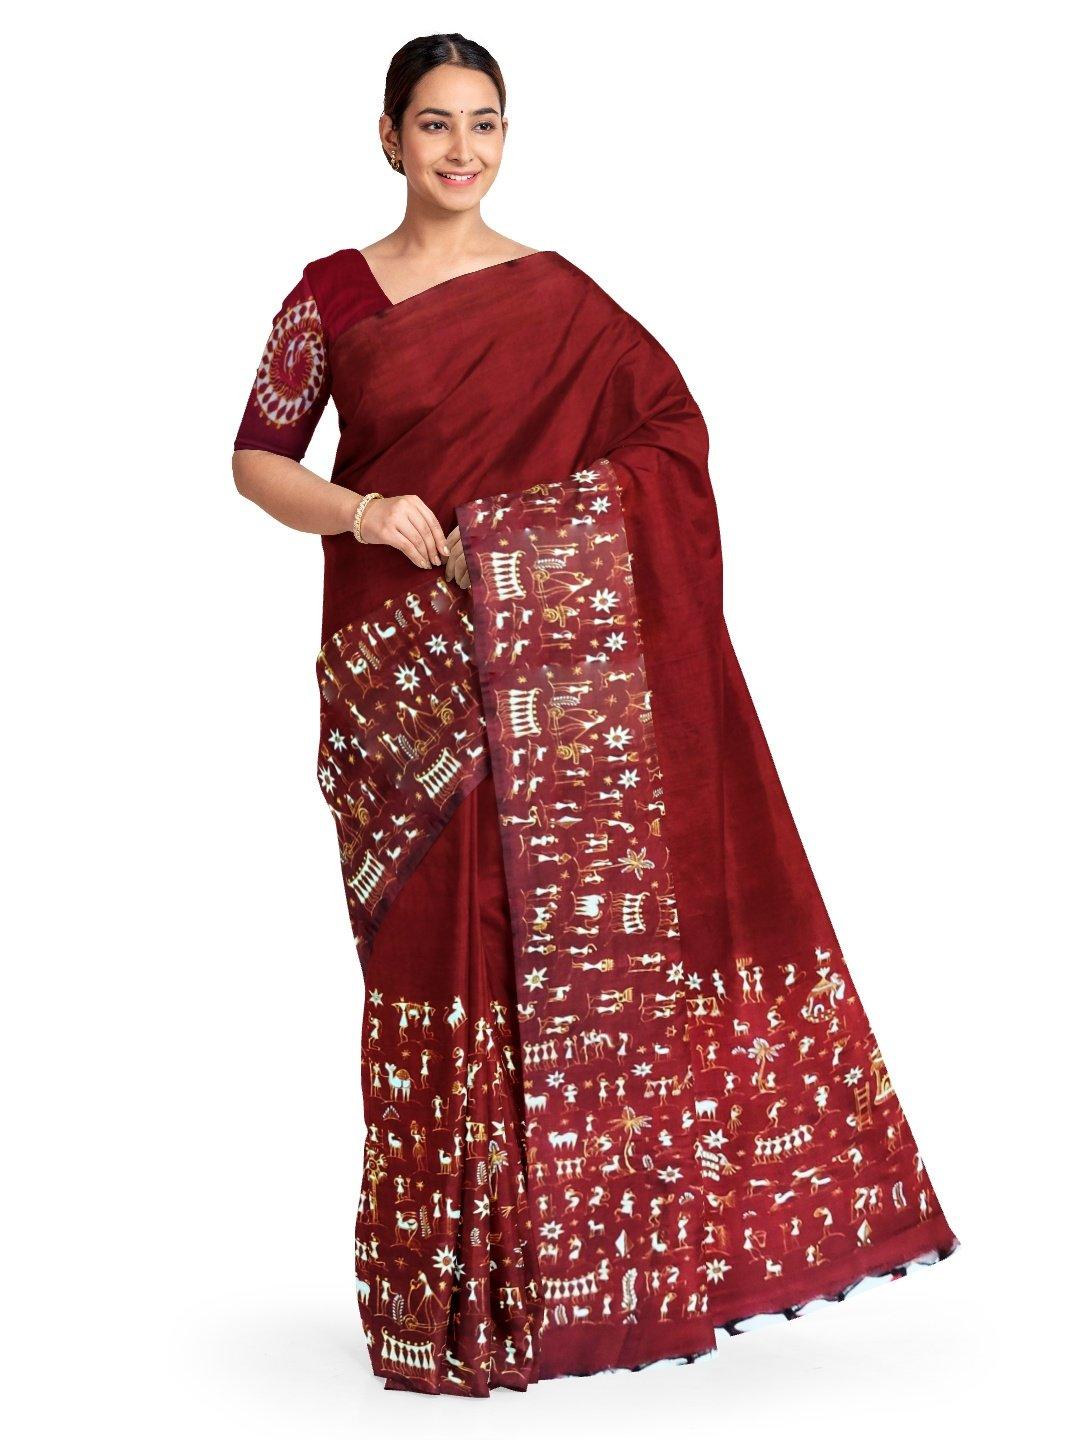 Maroon Cotton Saree with hand painted Tribal Motifs - Crafts Collection